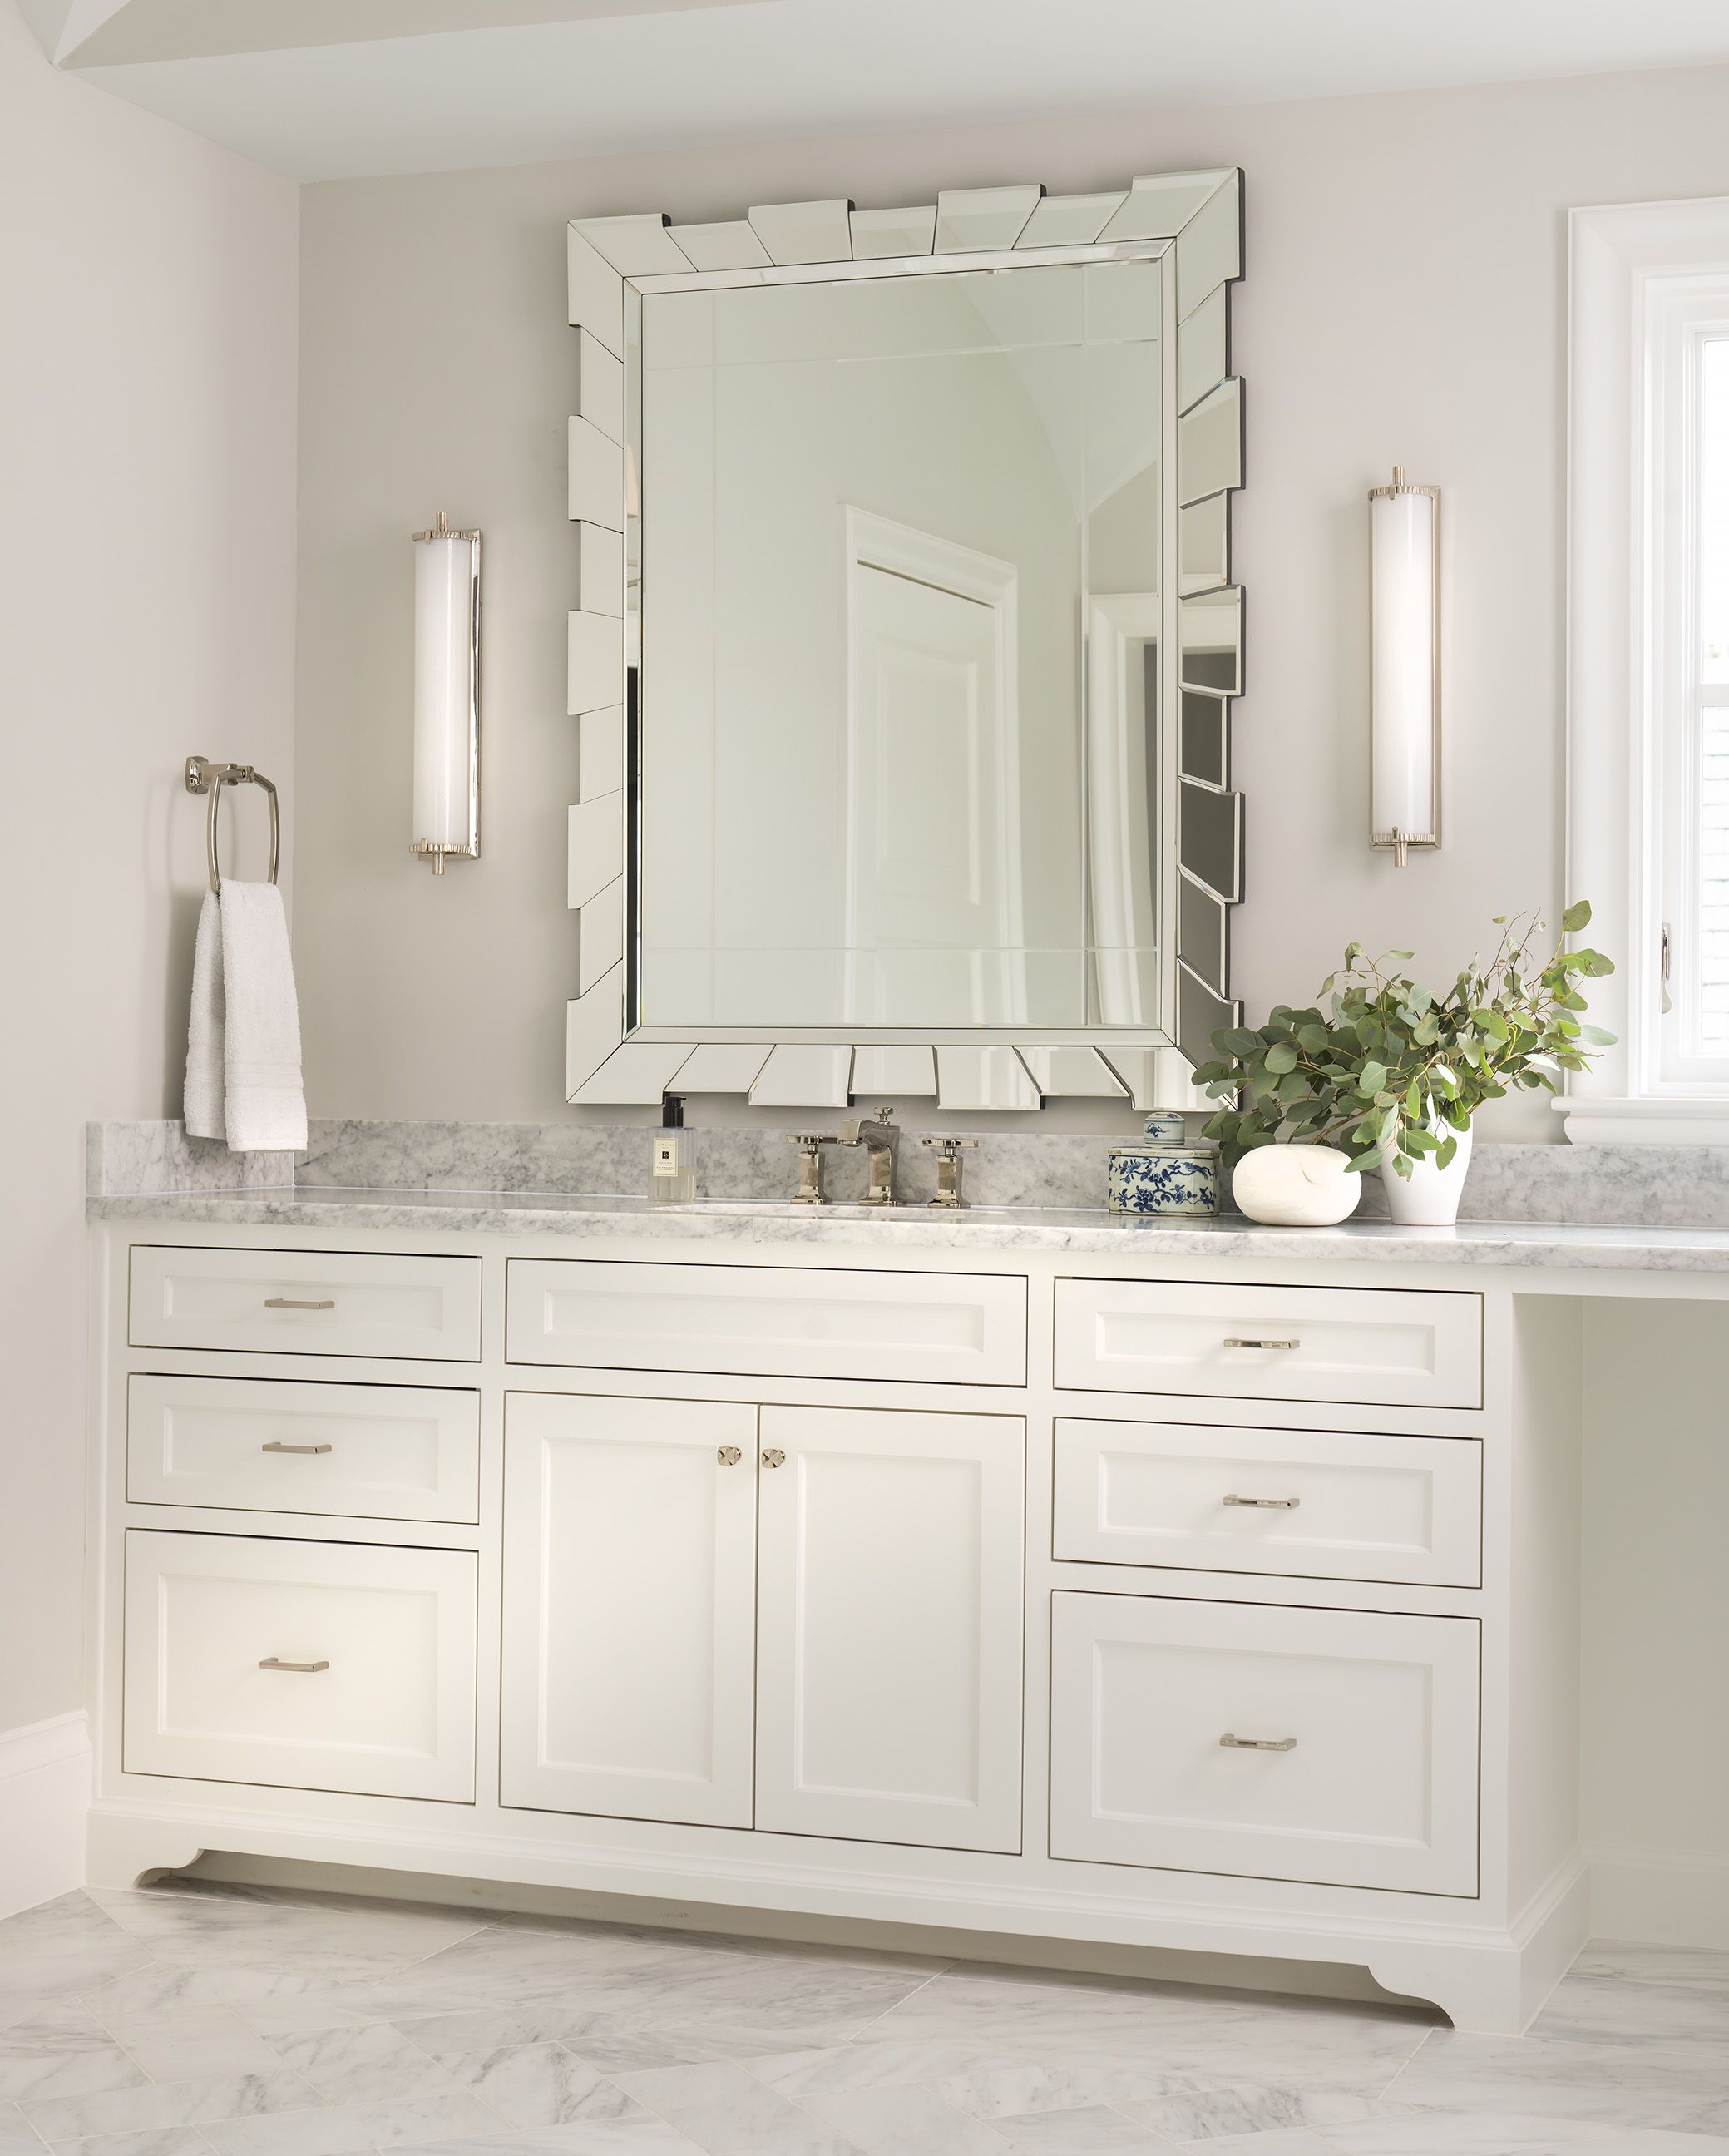 His And Hers Bathroom Ideas, His And Hers Vanity